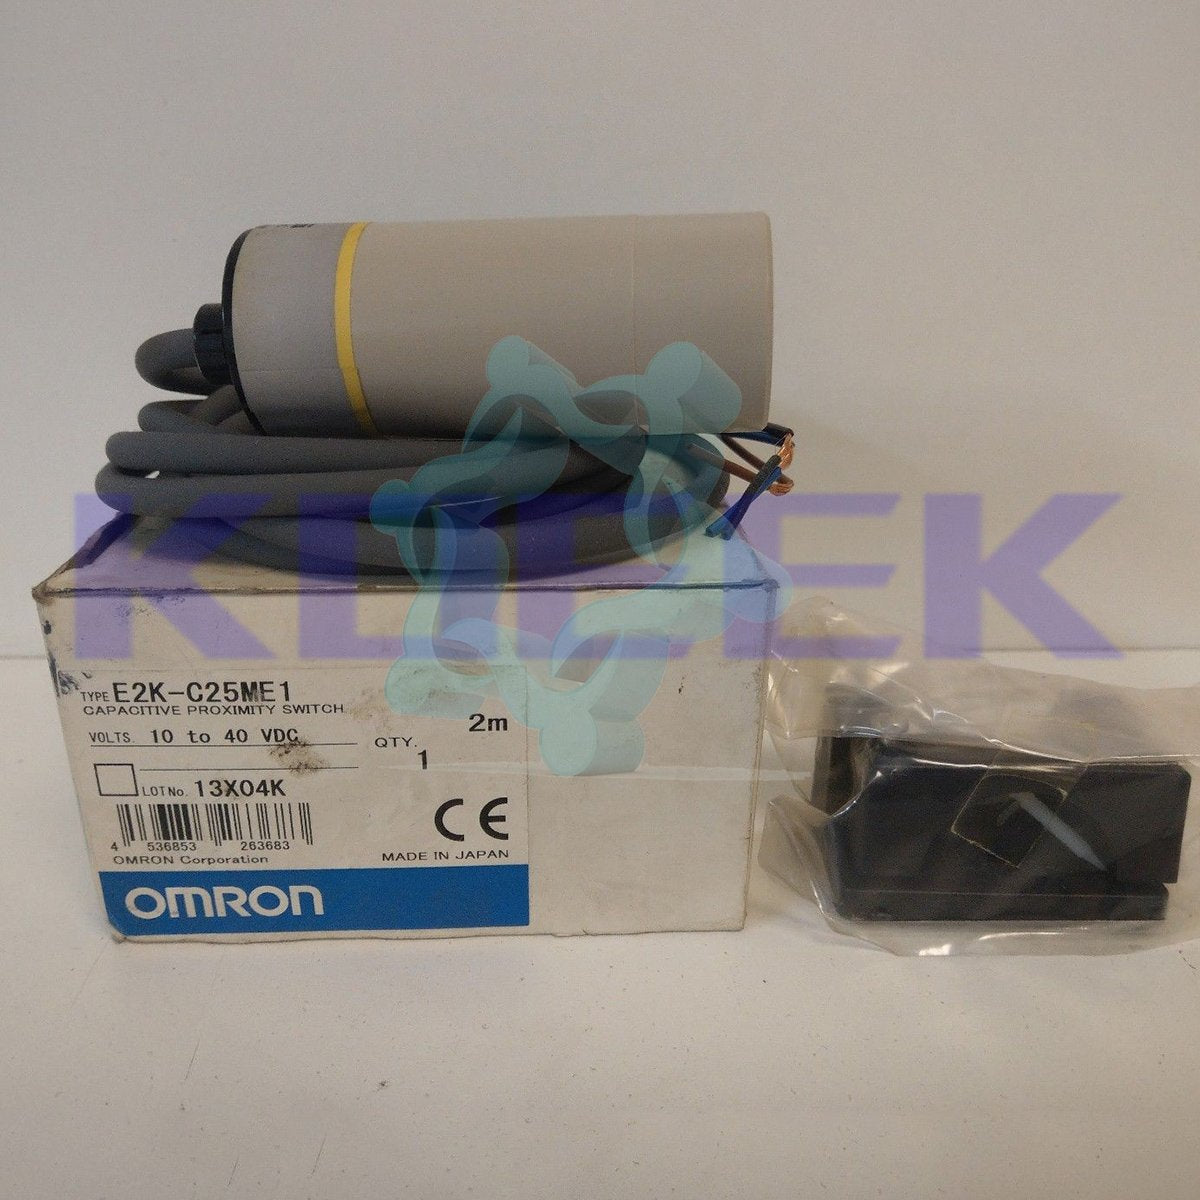 E2K-C25ME1 KOEED 1, 80%, import_2020_10_10_031751, Omron, Other